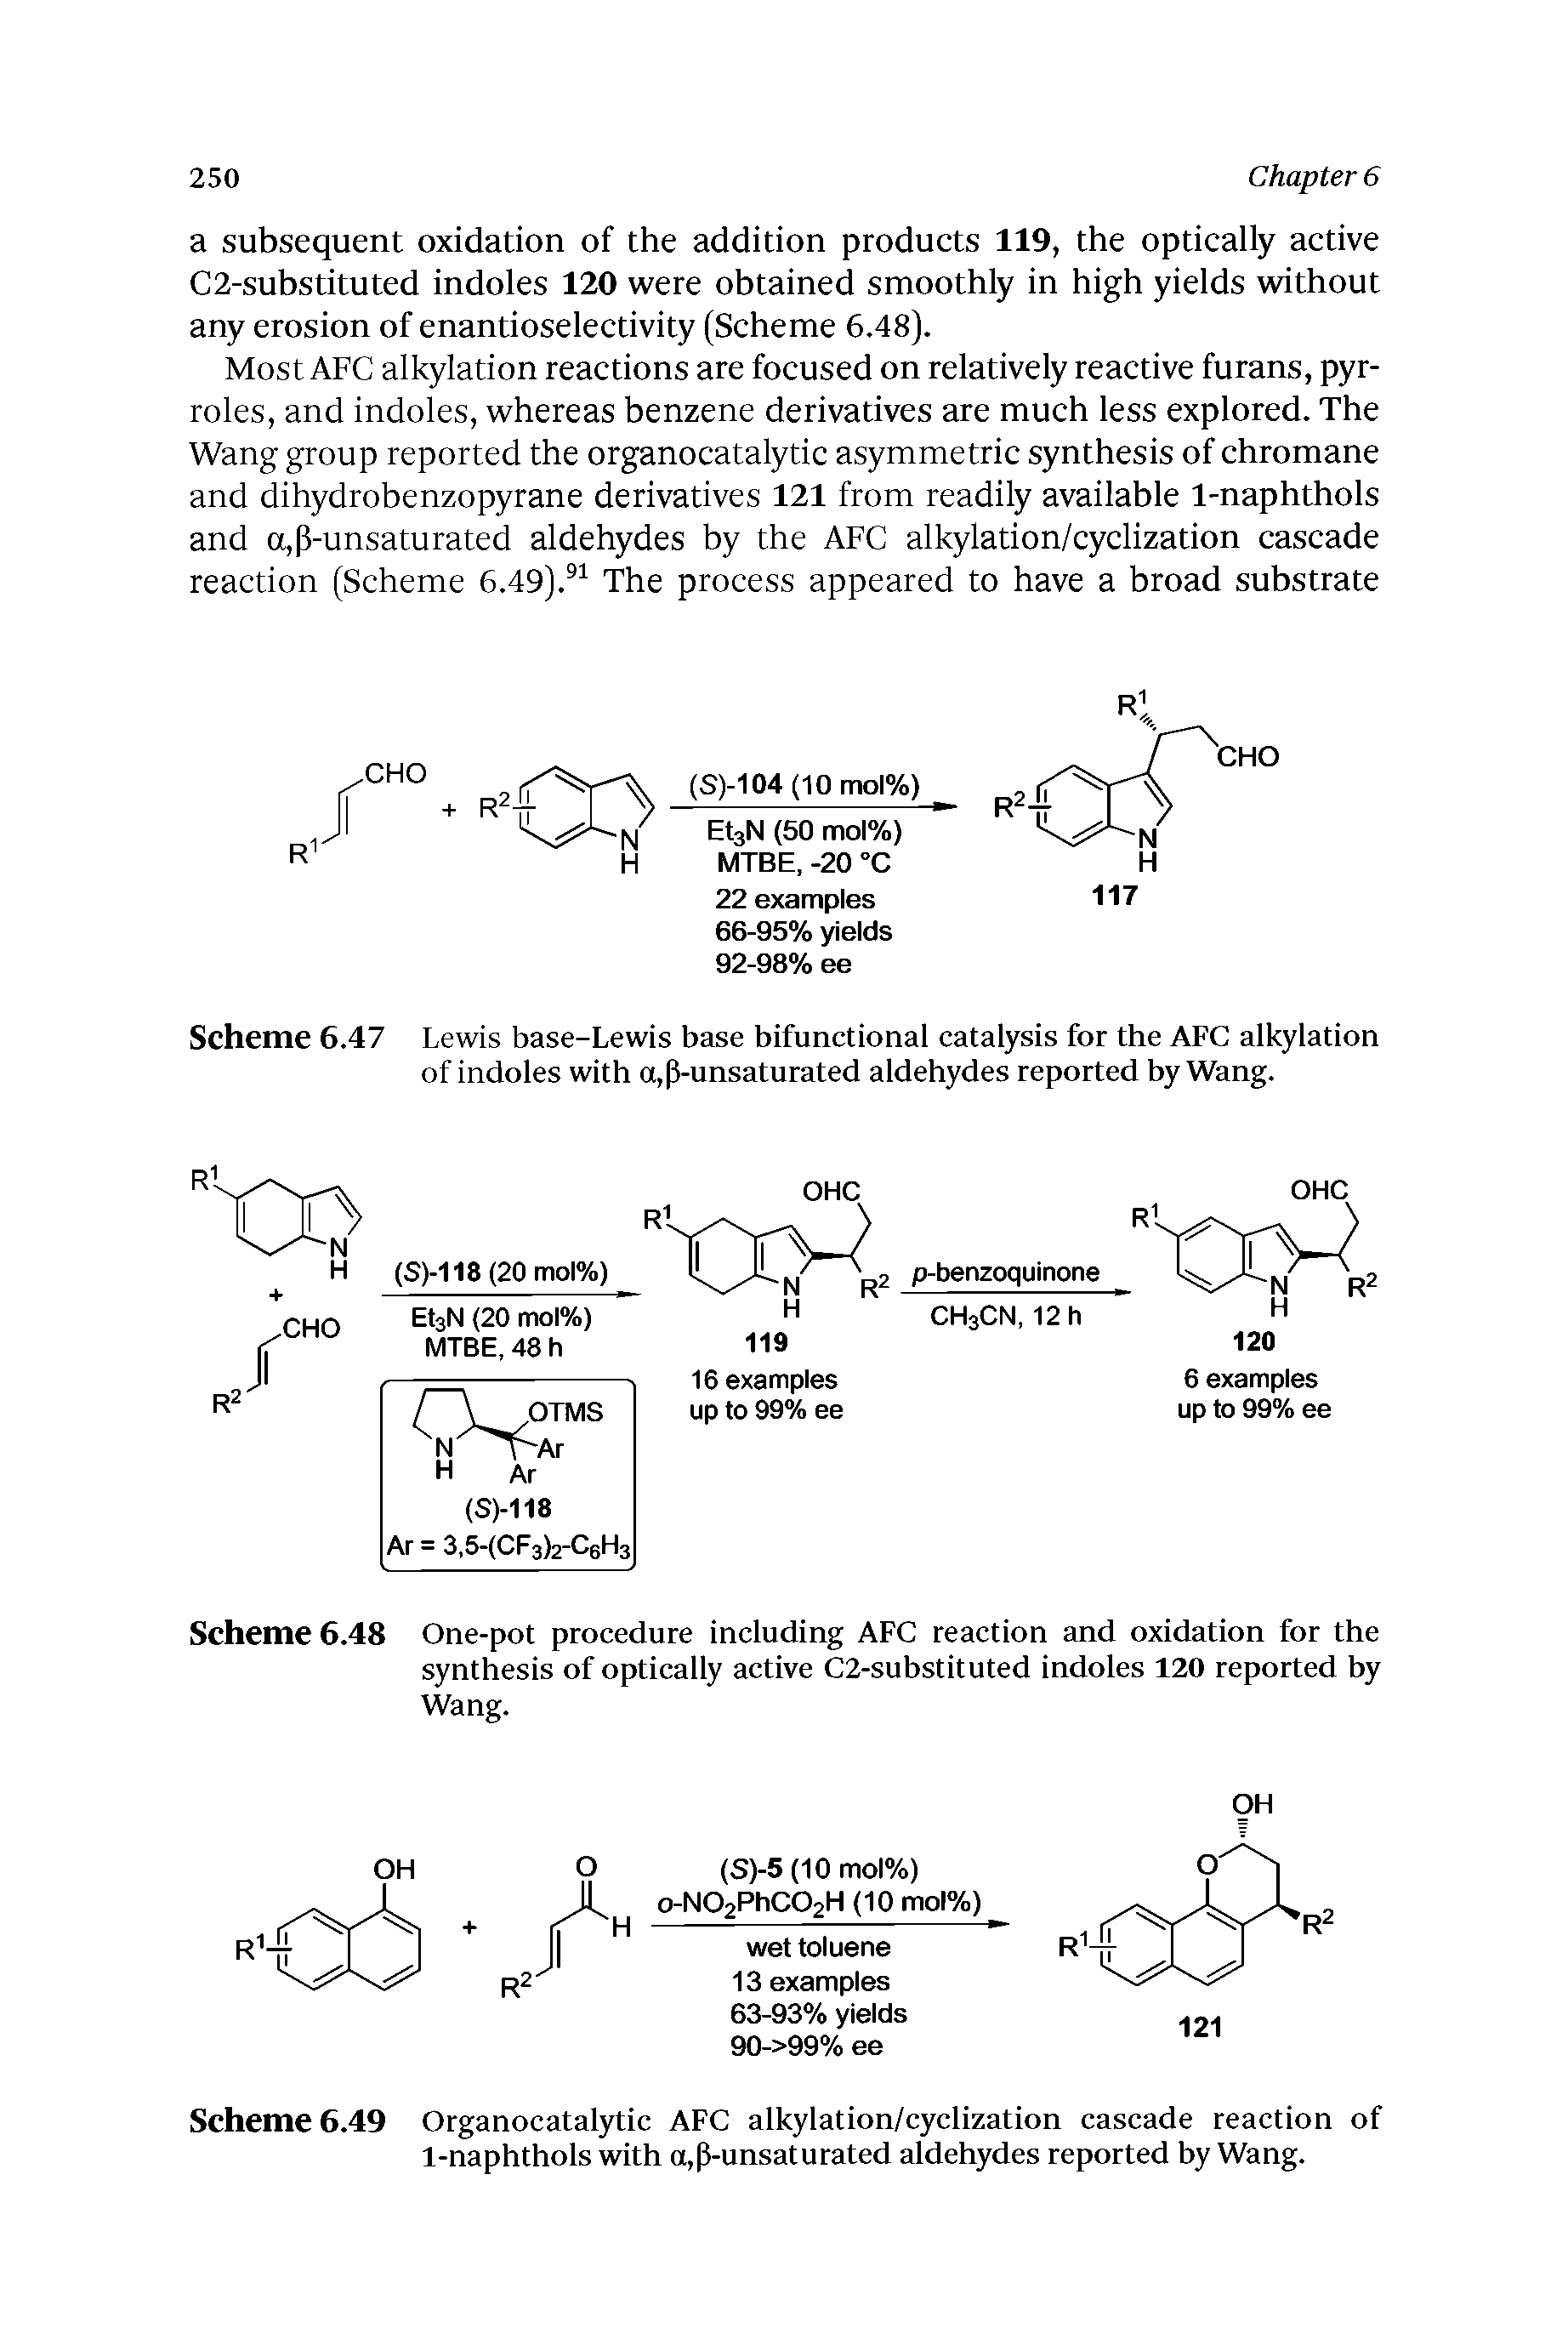 Scheme 6.47 Lewis base-Lewis base bifunctional catalysis for the AFC alkylation of indoles with o,p-unsaturated aldehydes reported by Wang.